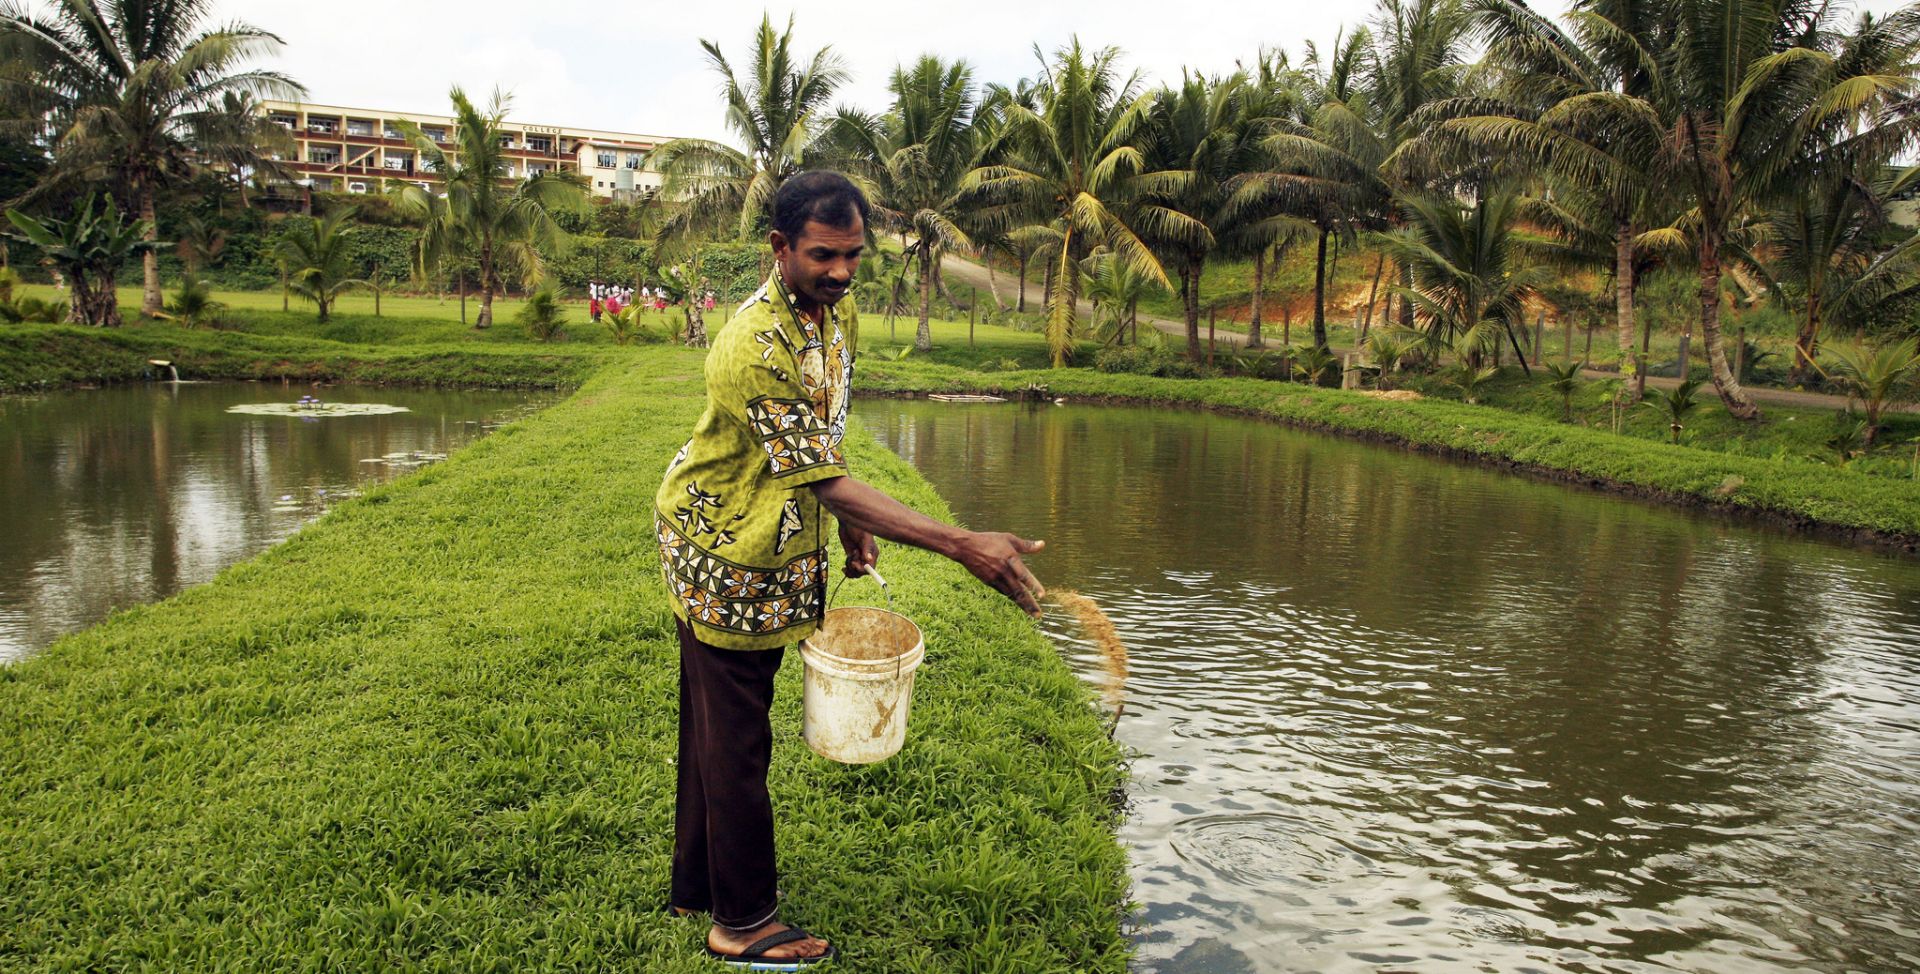 A man standing in a canal area throwing fish food into the water, behind him are palm trees